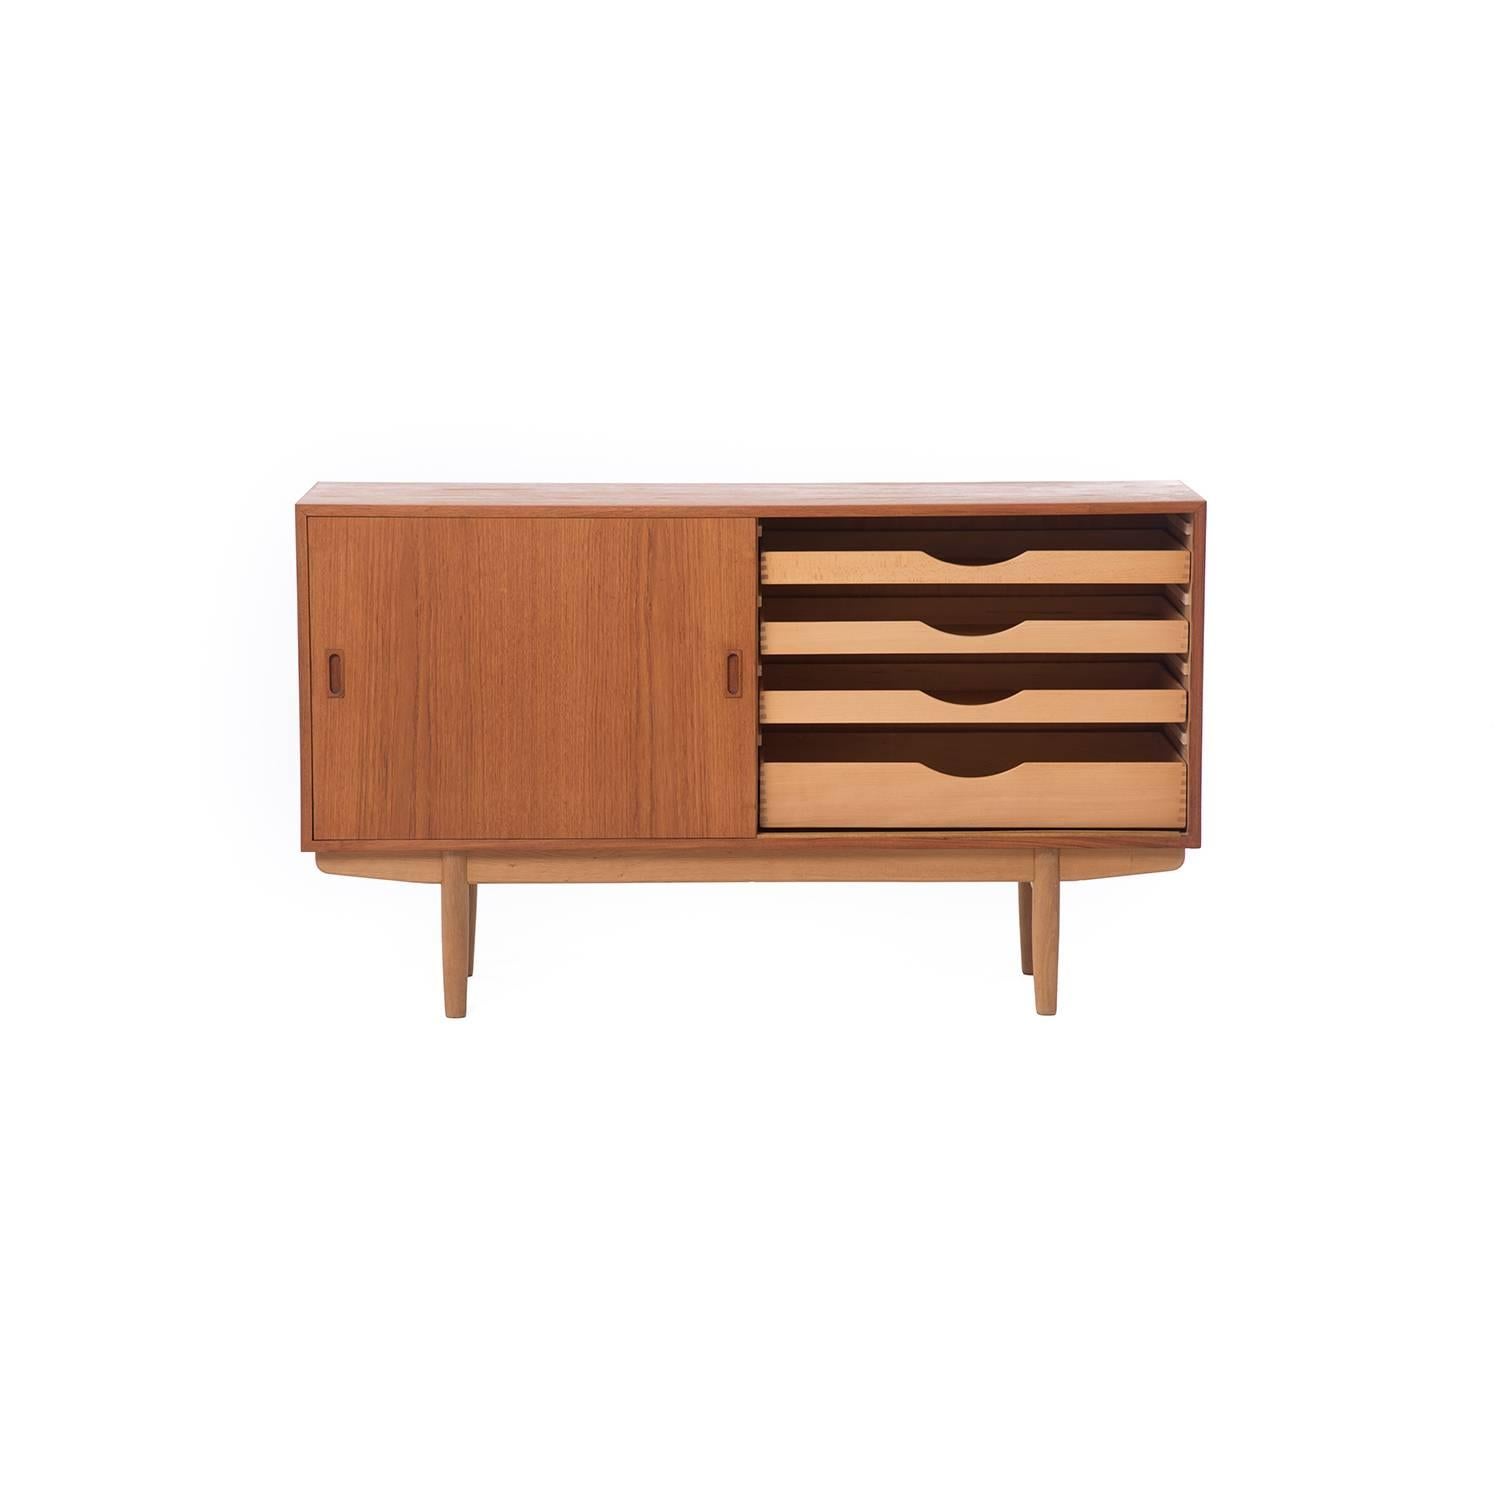 This Børge Mogensen teak sideboard with oak legs features a series of adjustable shelves as well as four drawers.